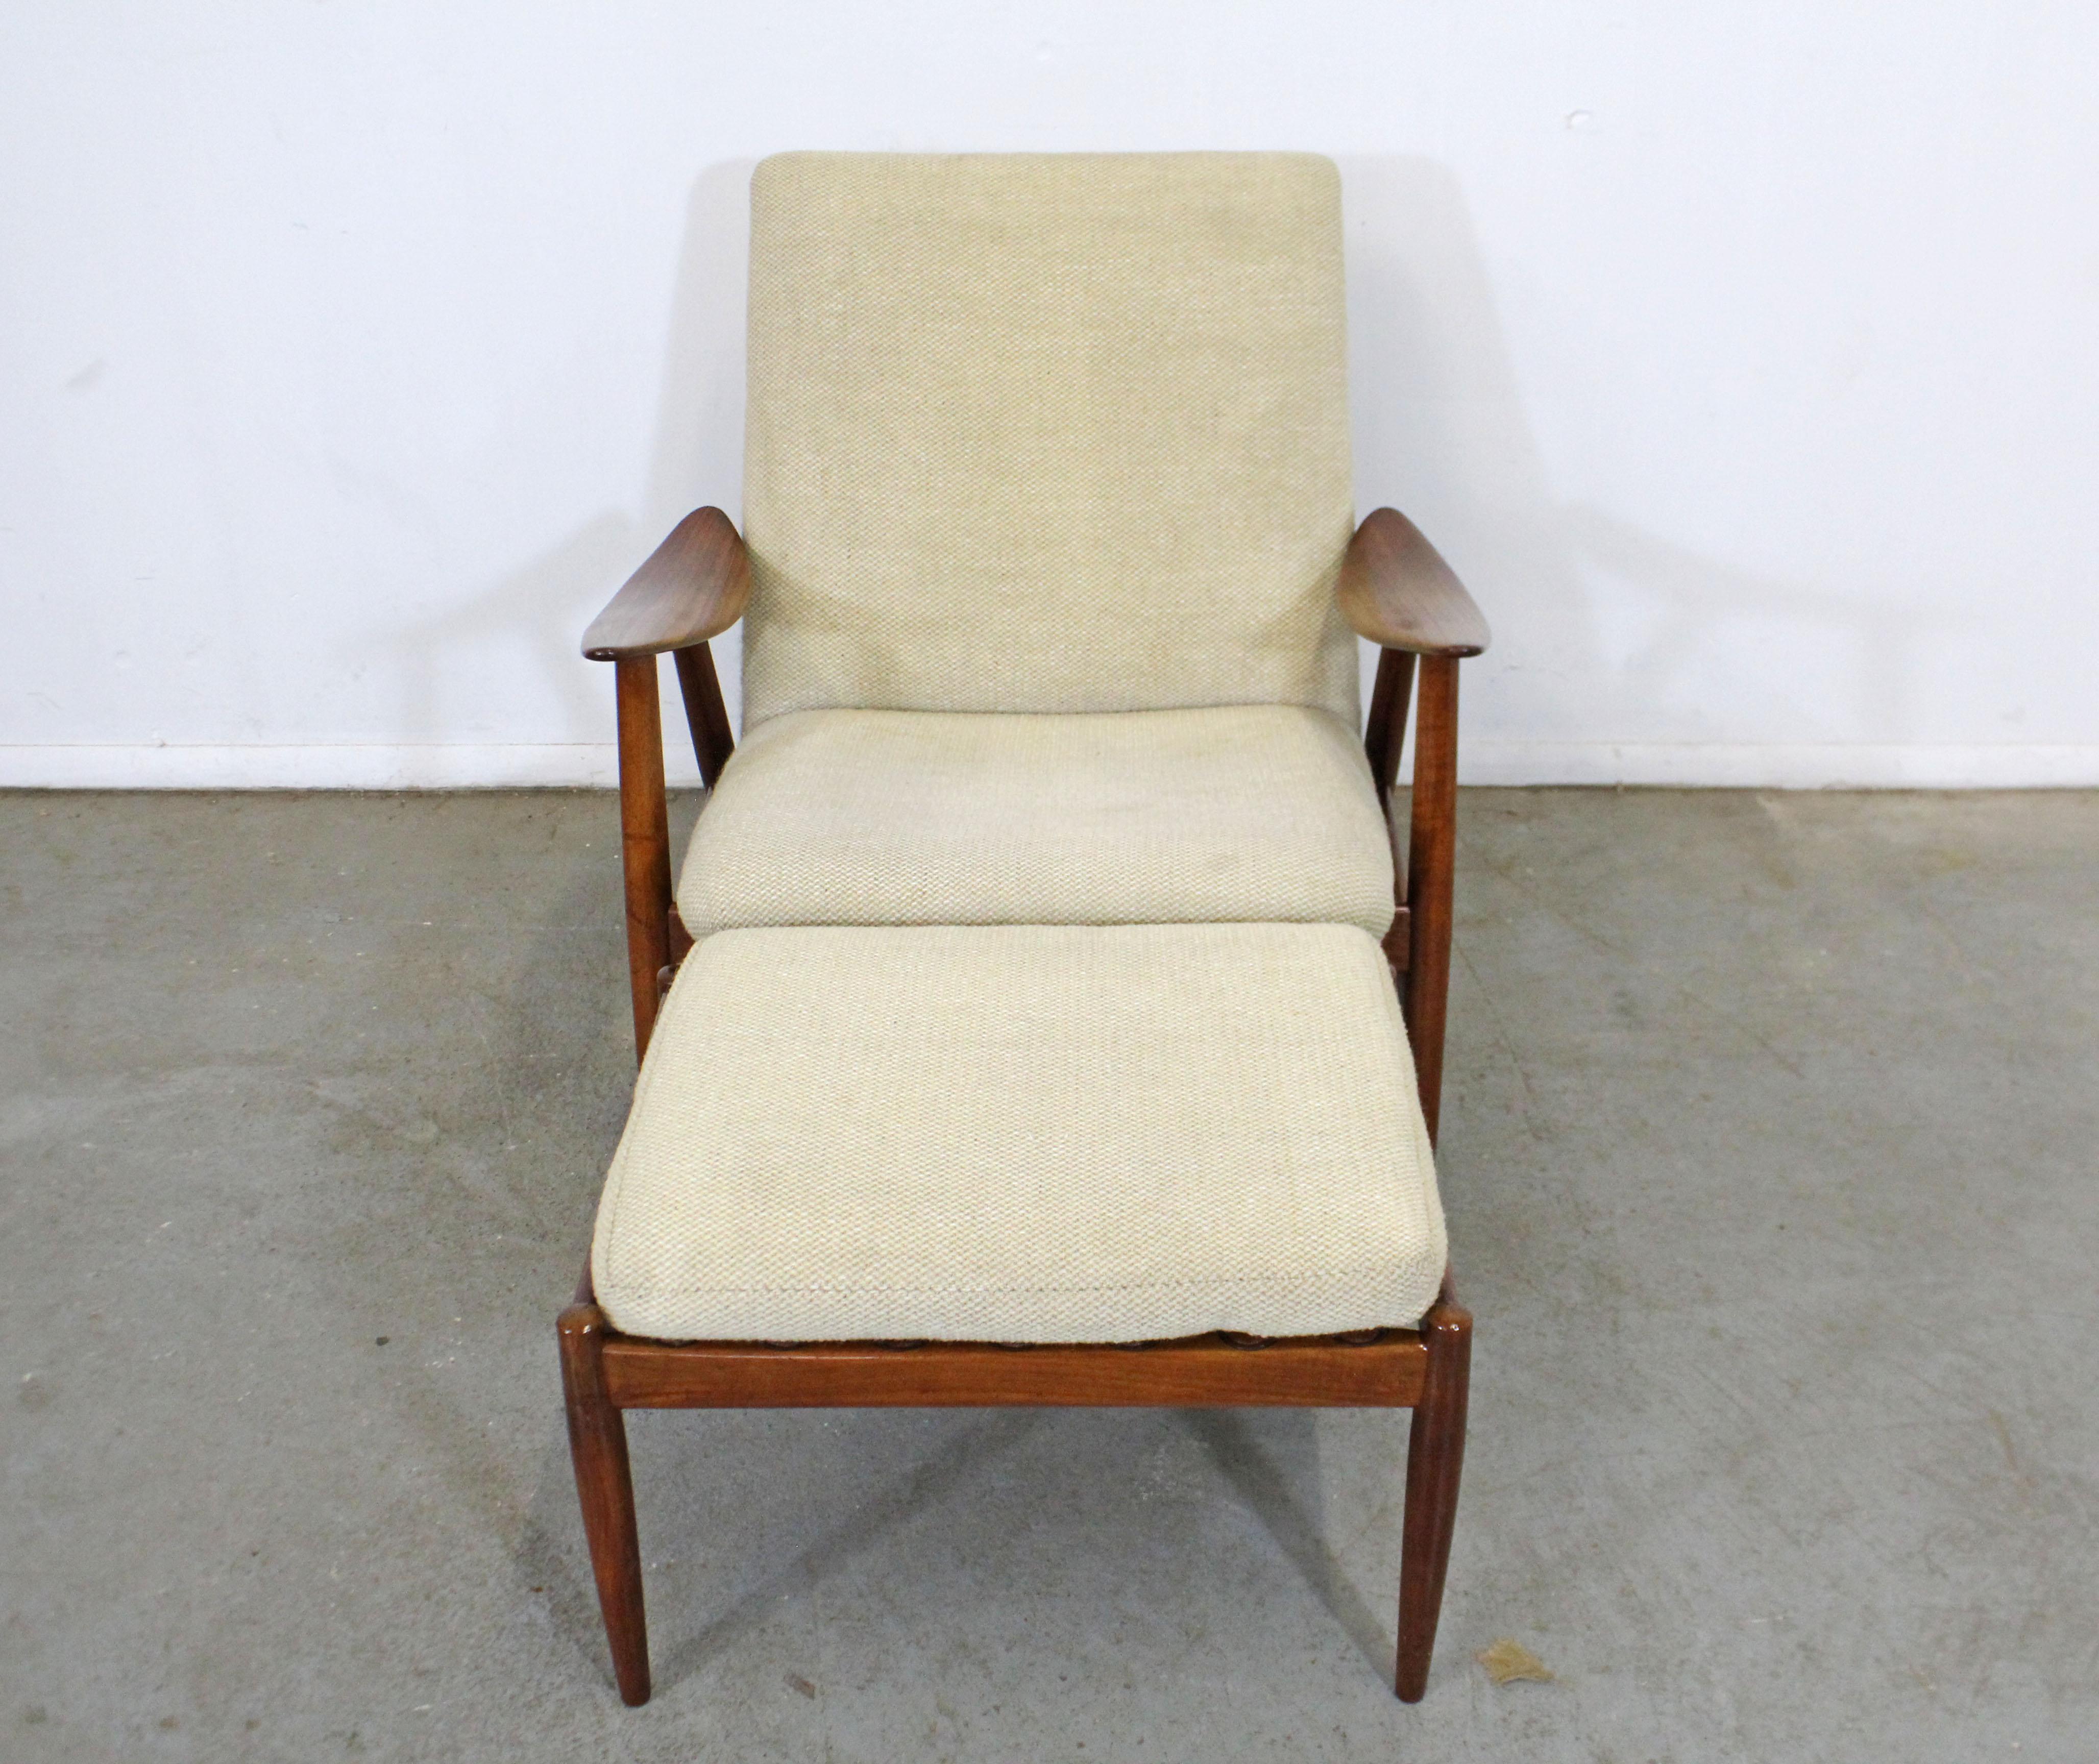 What a find. Offered is a vintage Danish modern lounge chair and ottoman with teak bases. Features uniquely sculpted arms and legs. In good condition with slight surface scratches and faint stains on the fabric. It is structurally sound. It's not